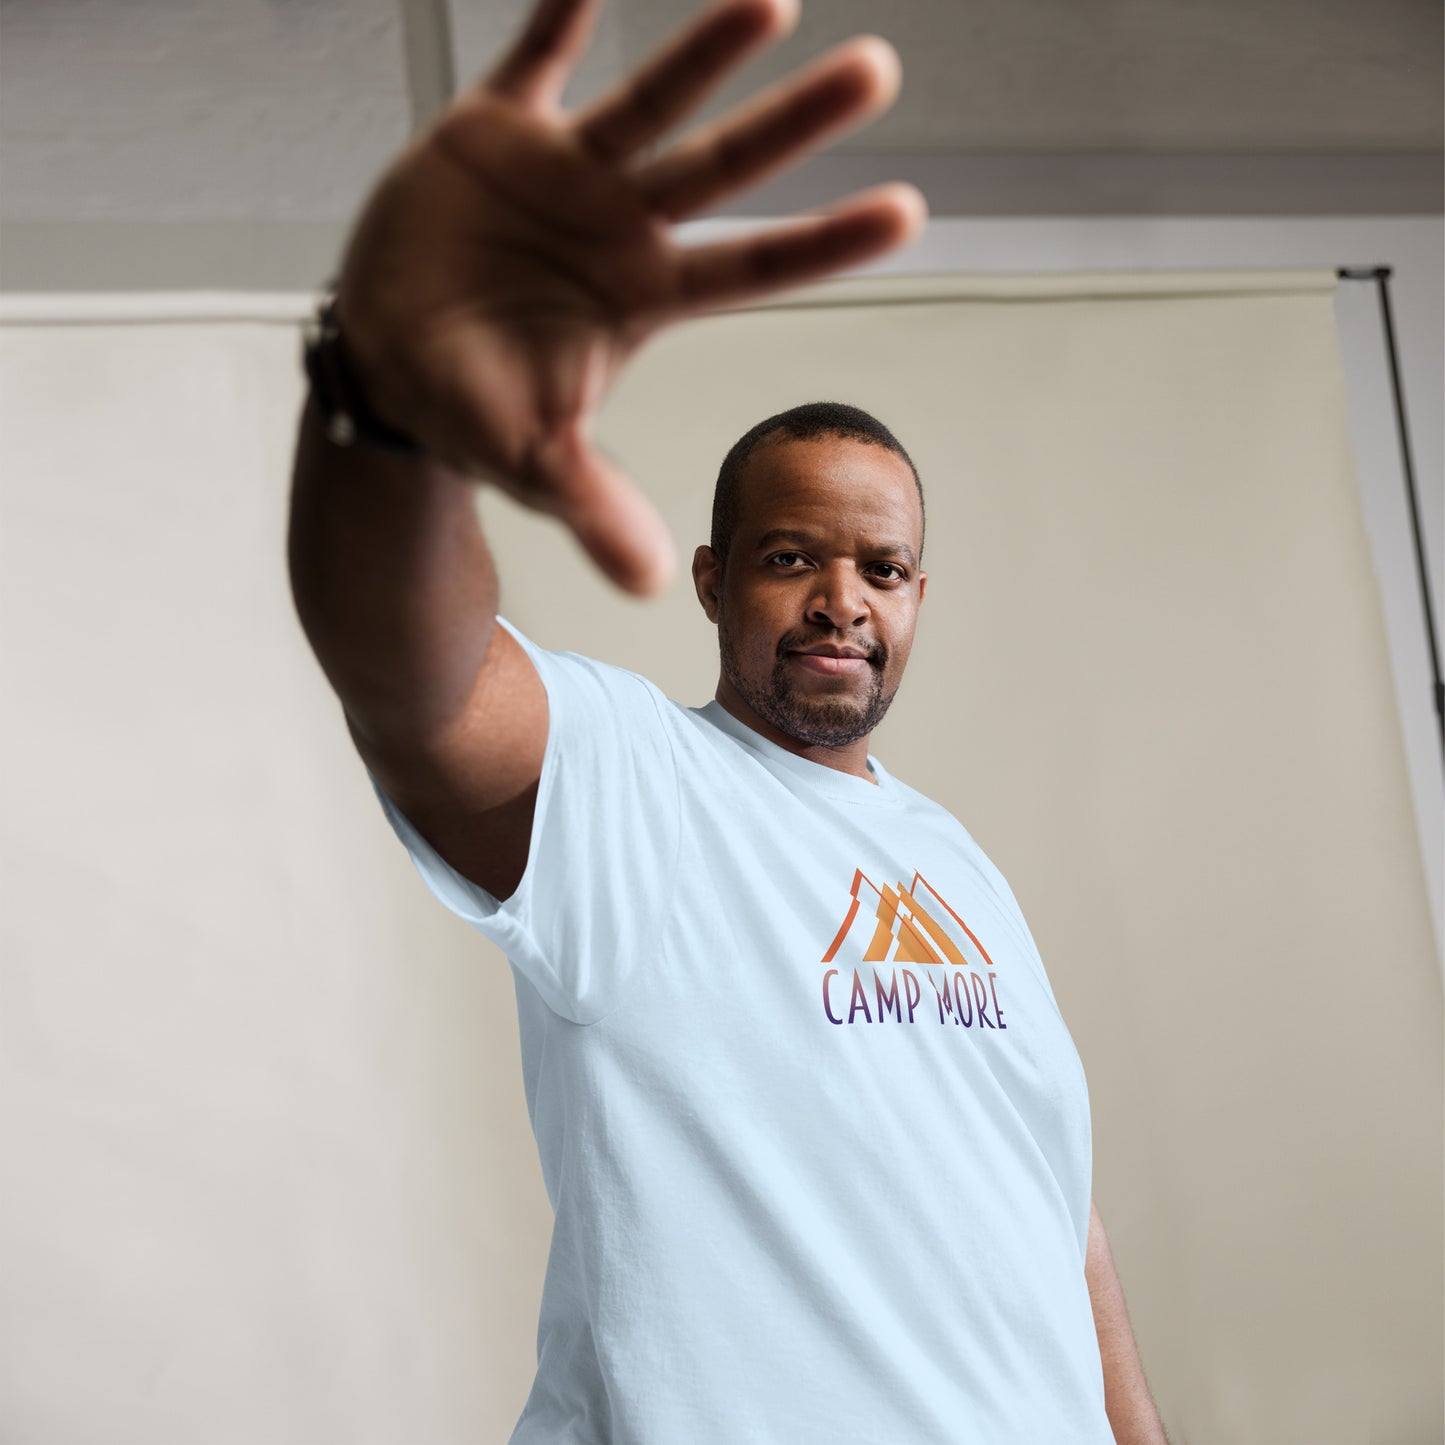 Man in a light blue t-shirt with  in stylized orange lettering below a minimalist mountain graphic reaching out towards the camera in a stopping gesture, giving a serious expression, against a beige backdrop.